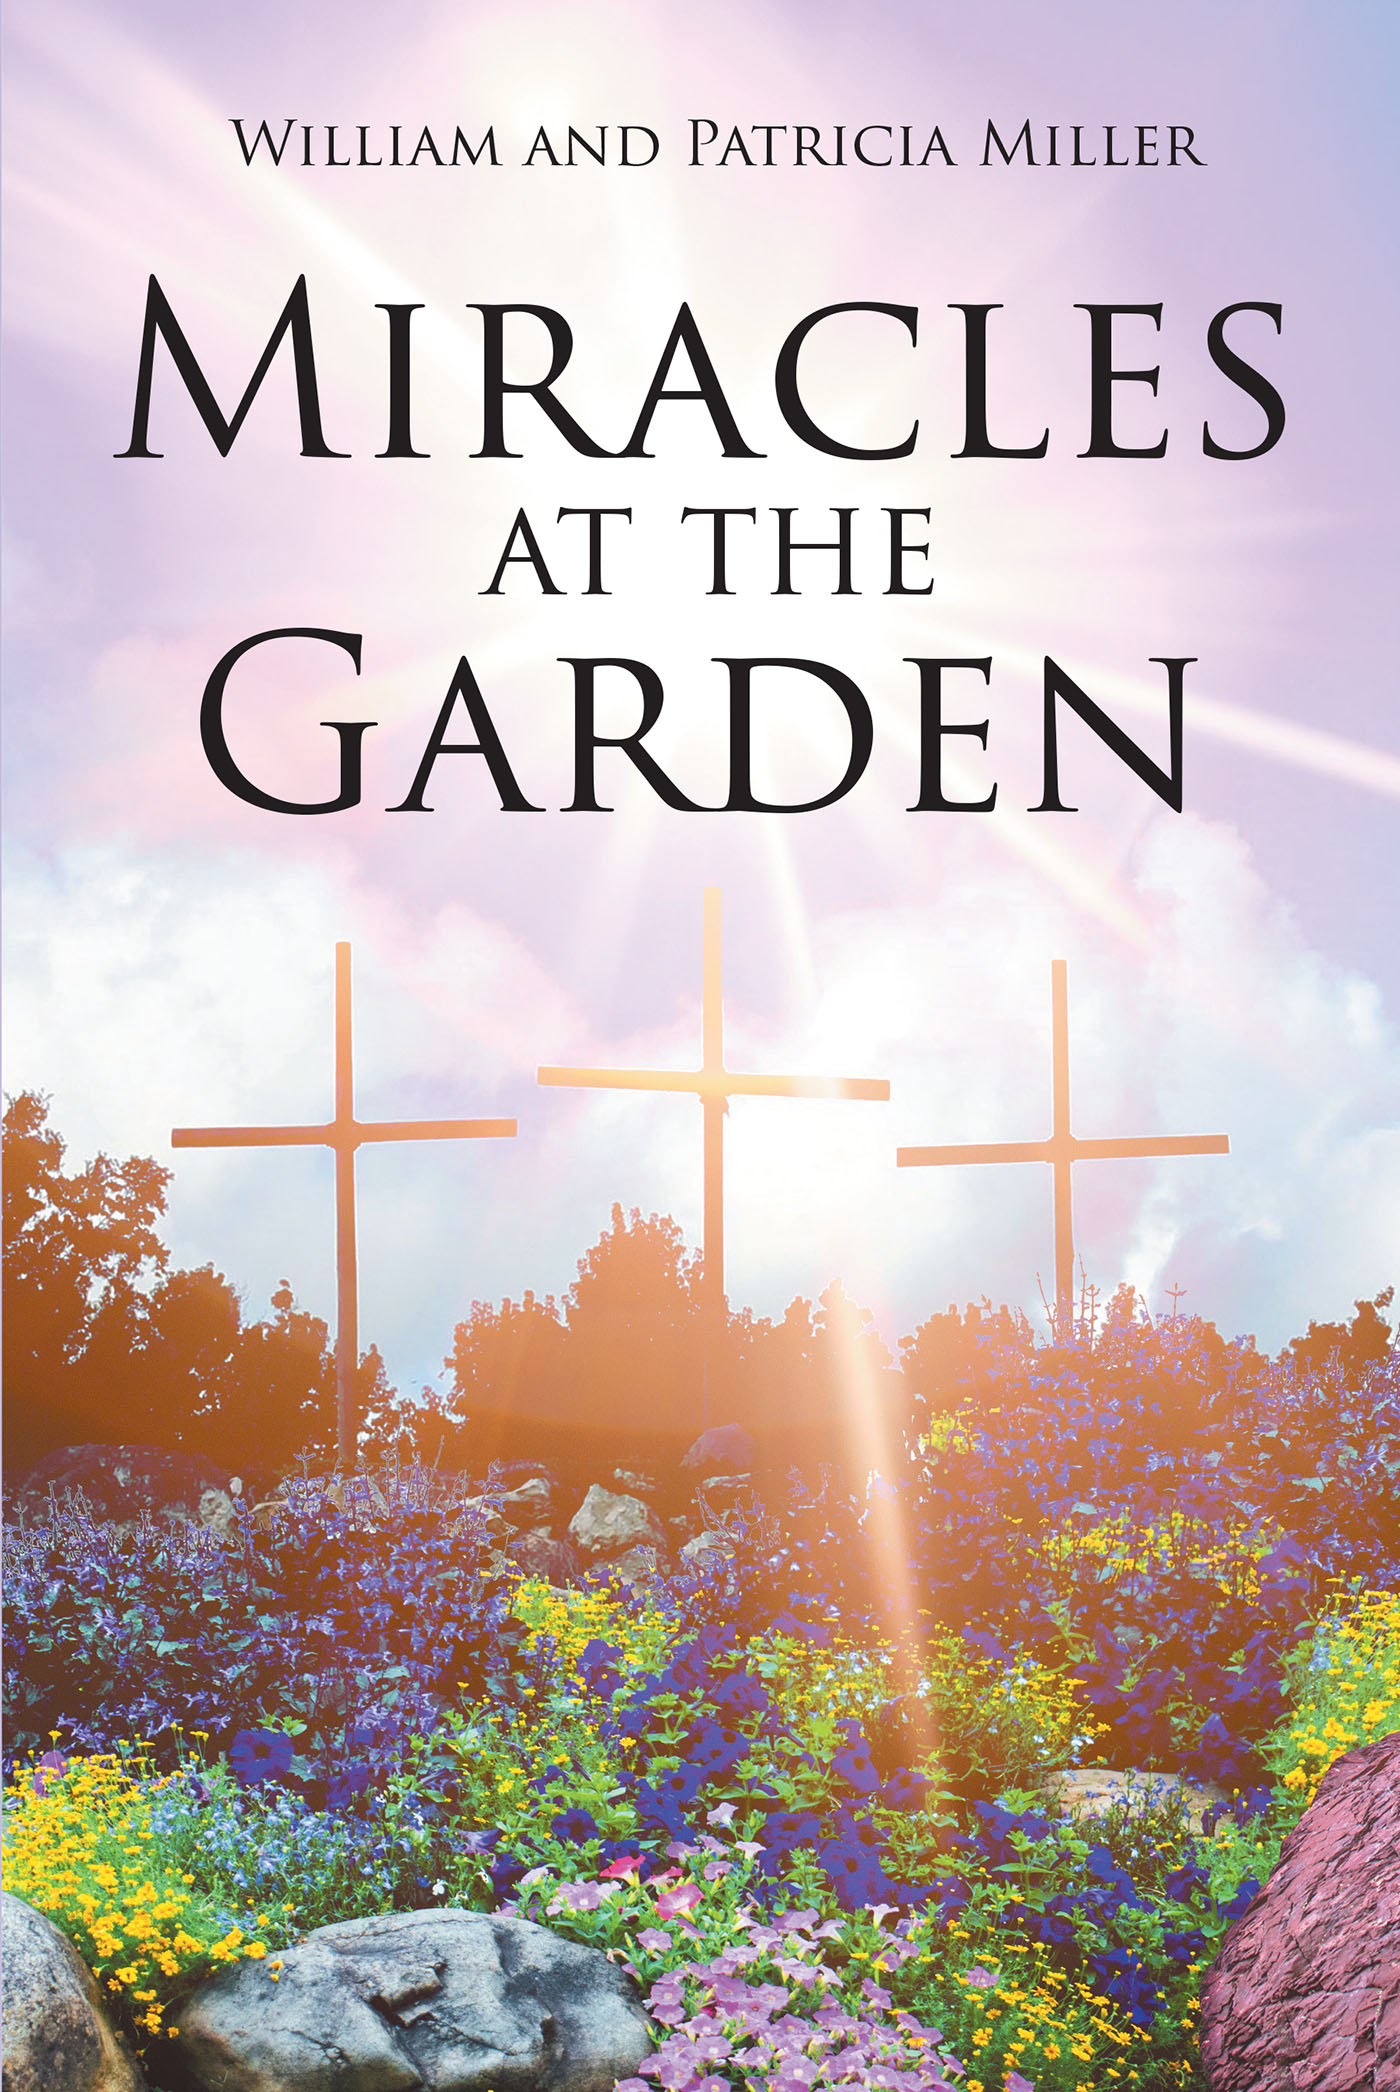 Authors William and Patricia Miller’s New Book, “Miracles at the Garden,” Celebrates Miracles as the Fruit of the Christian Faith